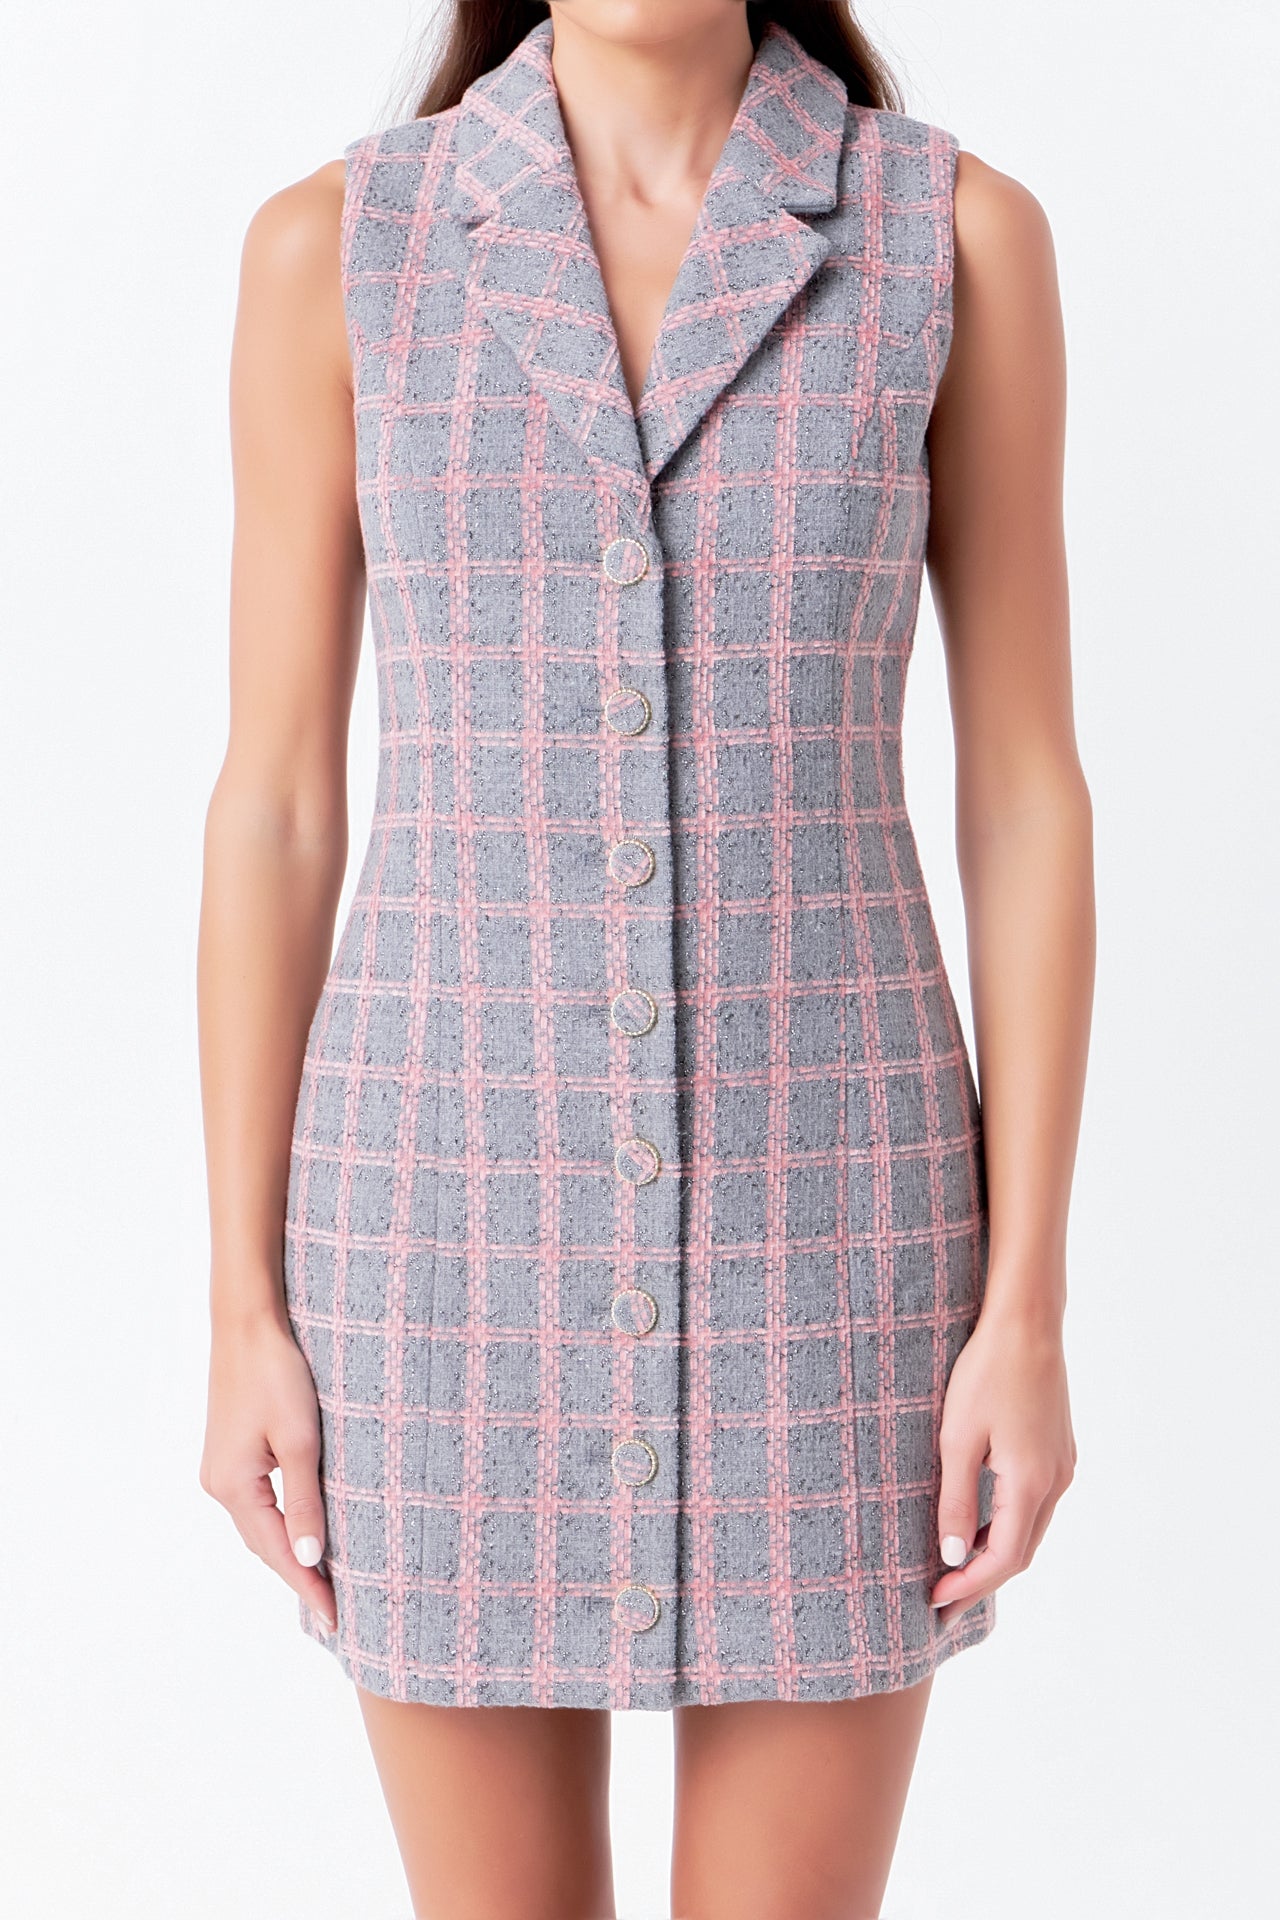 ENDLESS ROSE - Tweed Sleeveless Dress - DRESSES available at Objectrare